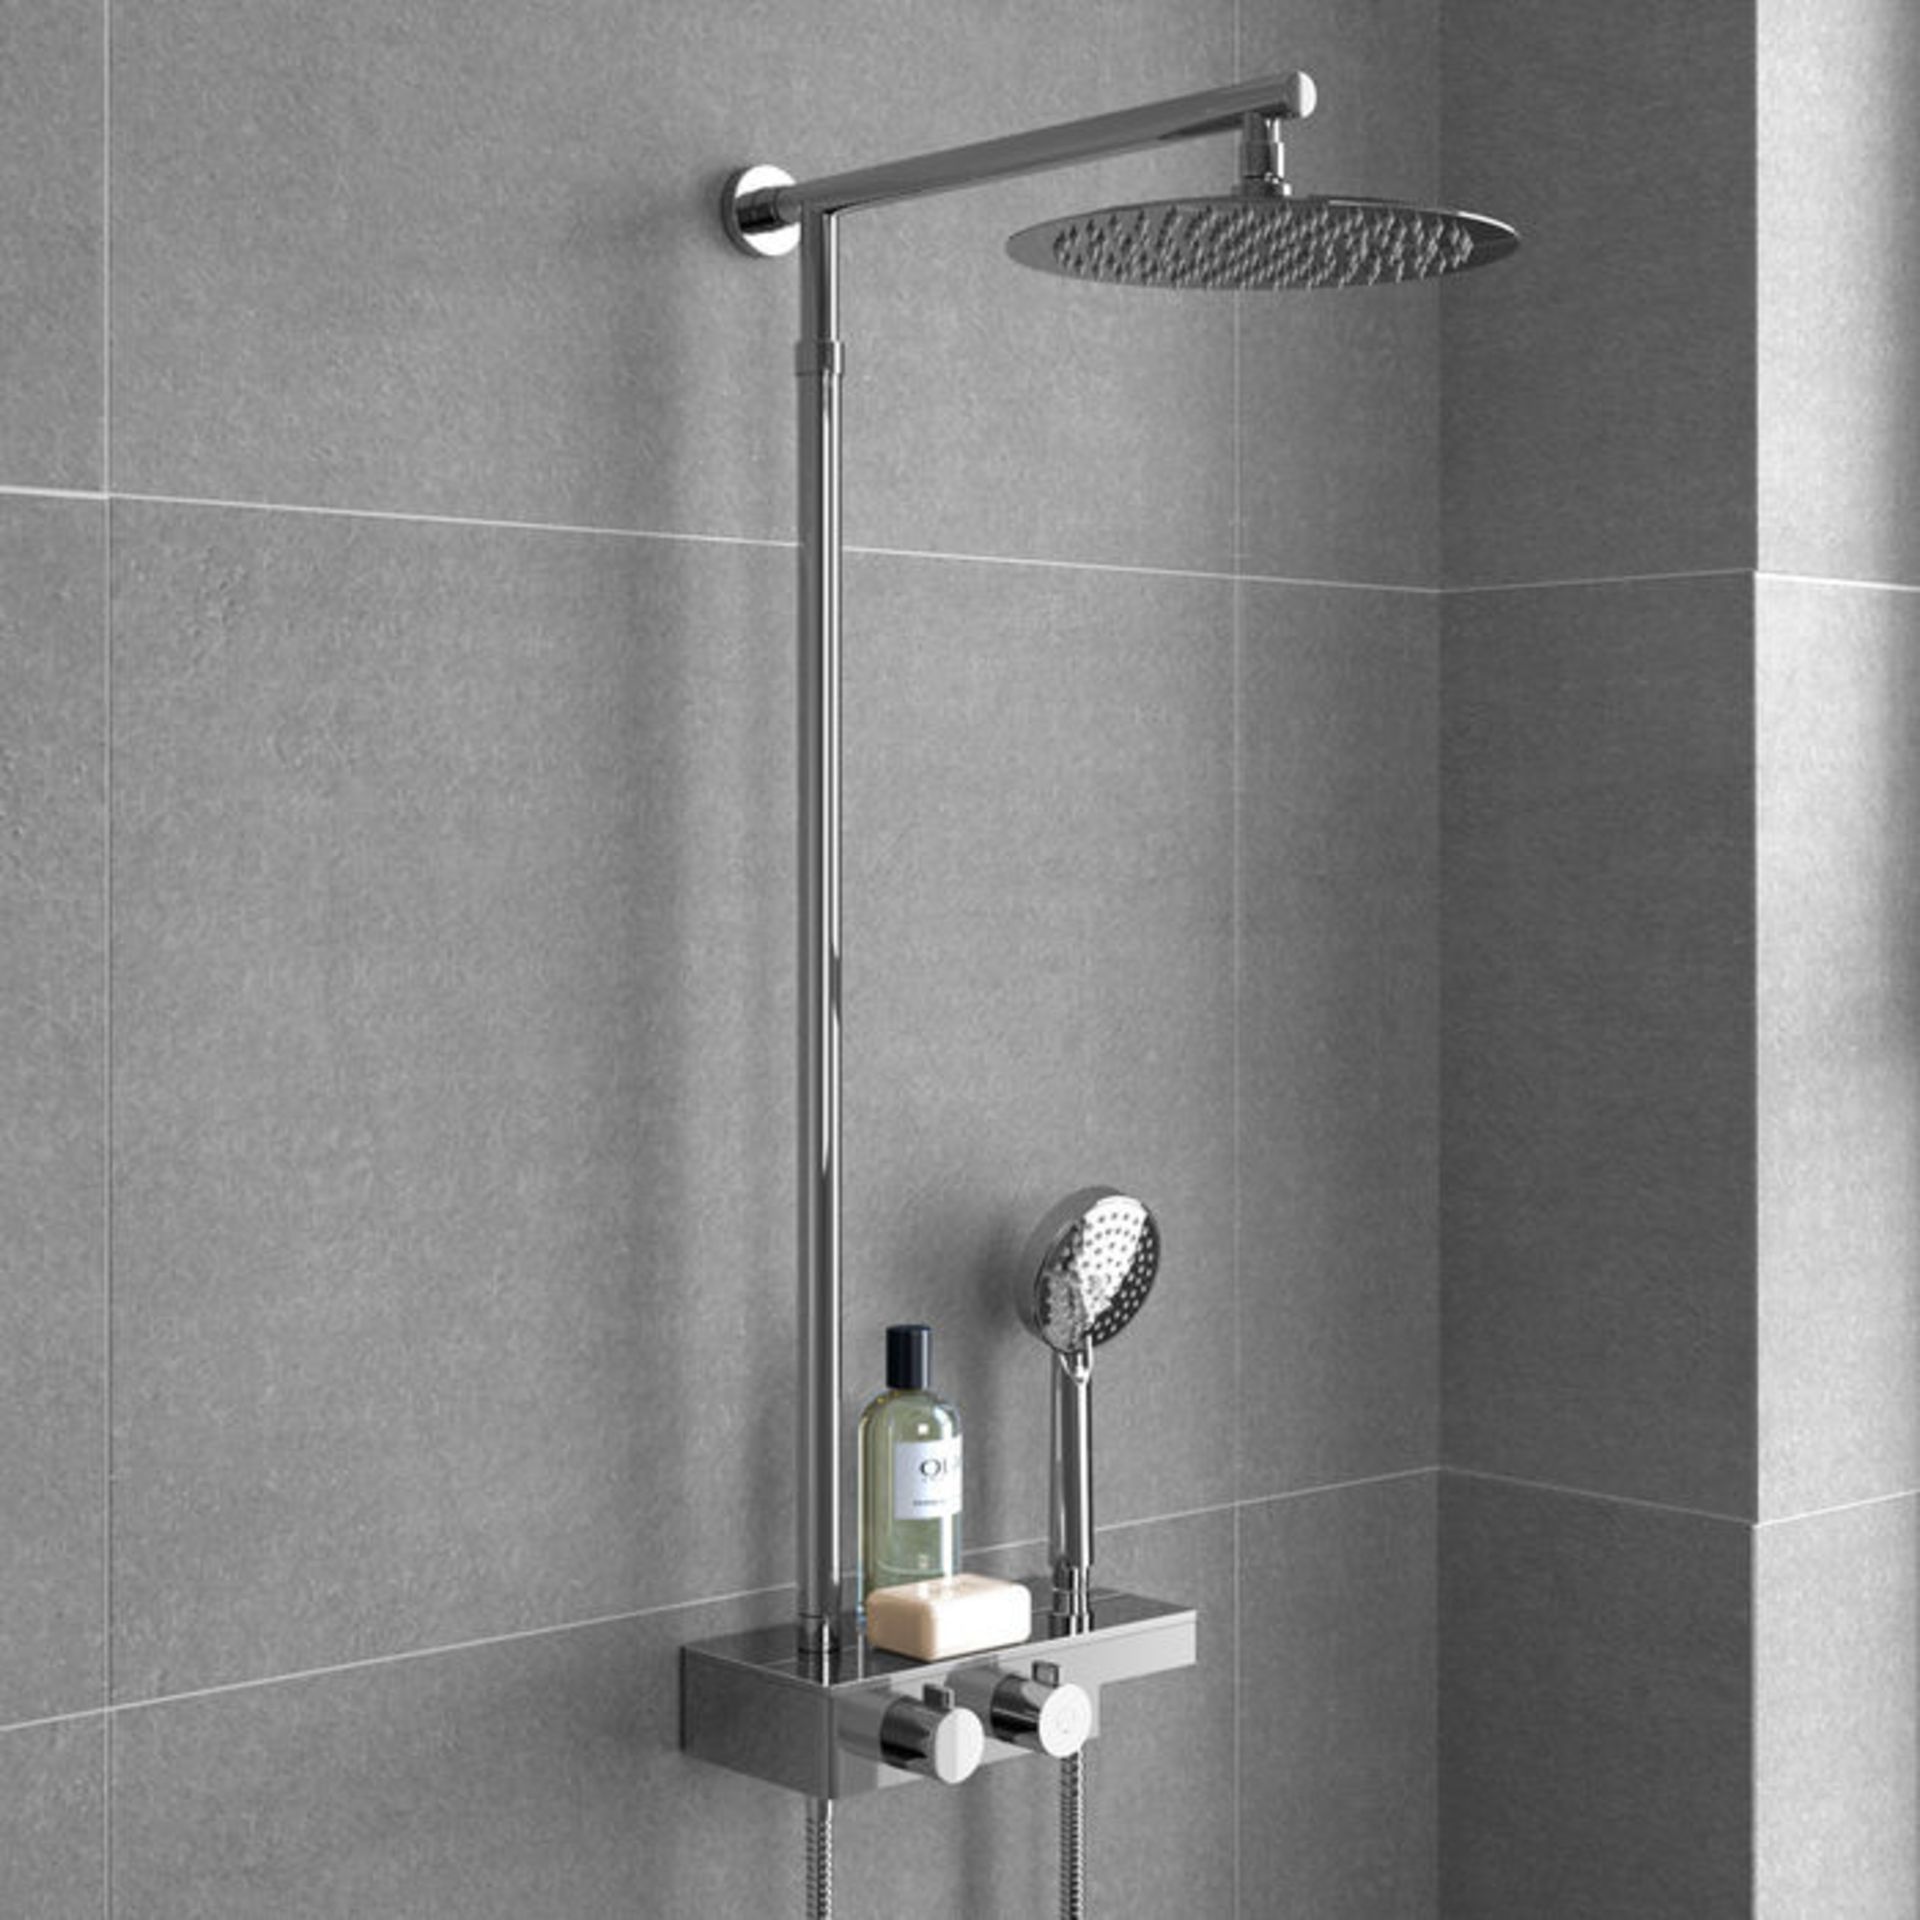 (PA37) Round Exposed Thermostatic Mixer Shower Kit & Large Head. Cool to touch shower for additional - Image 3 of 4